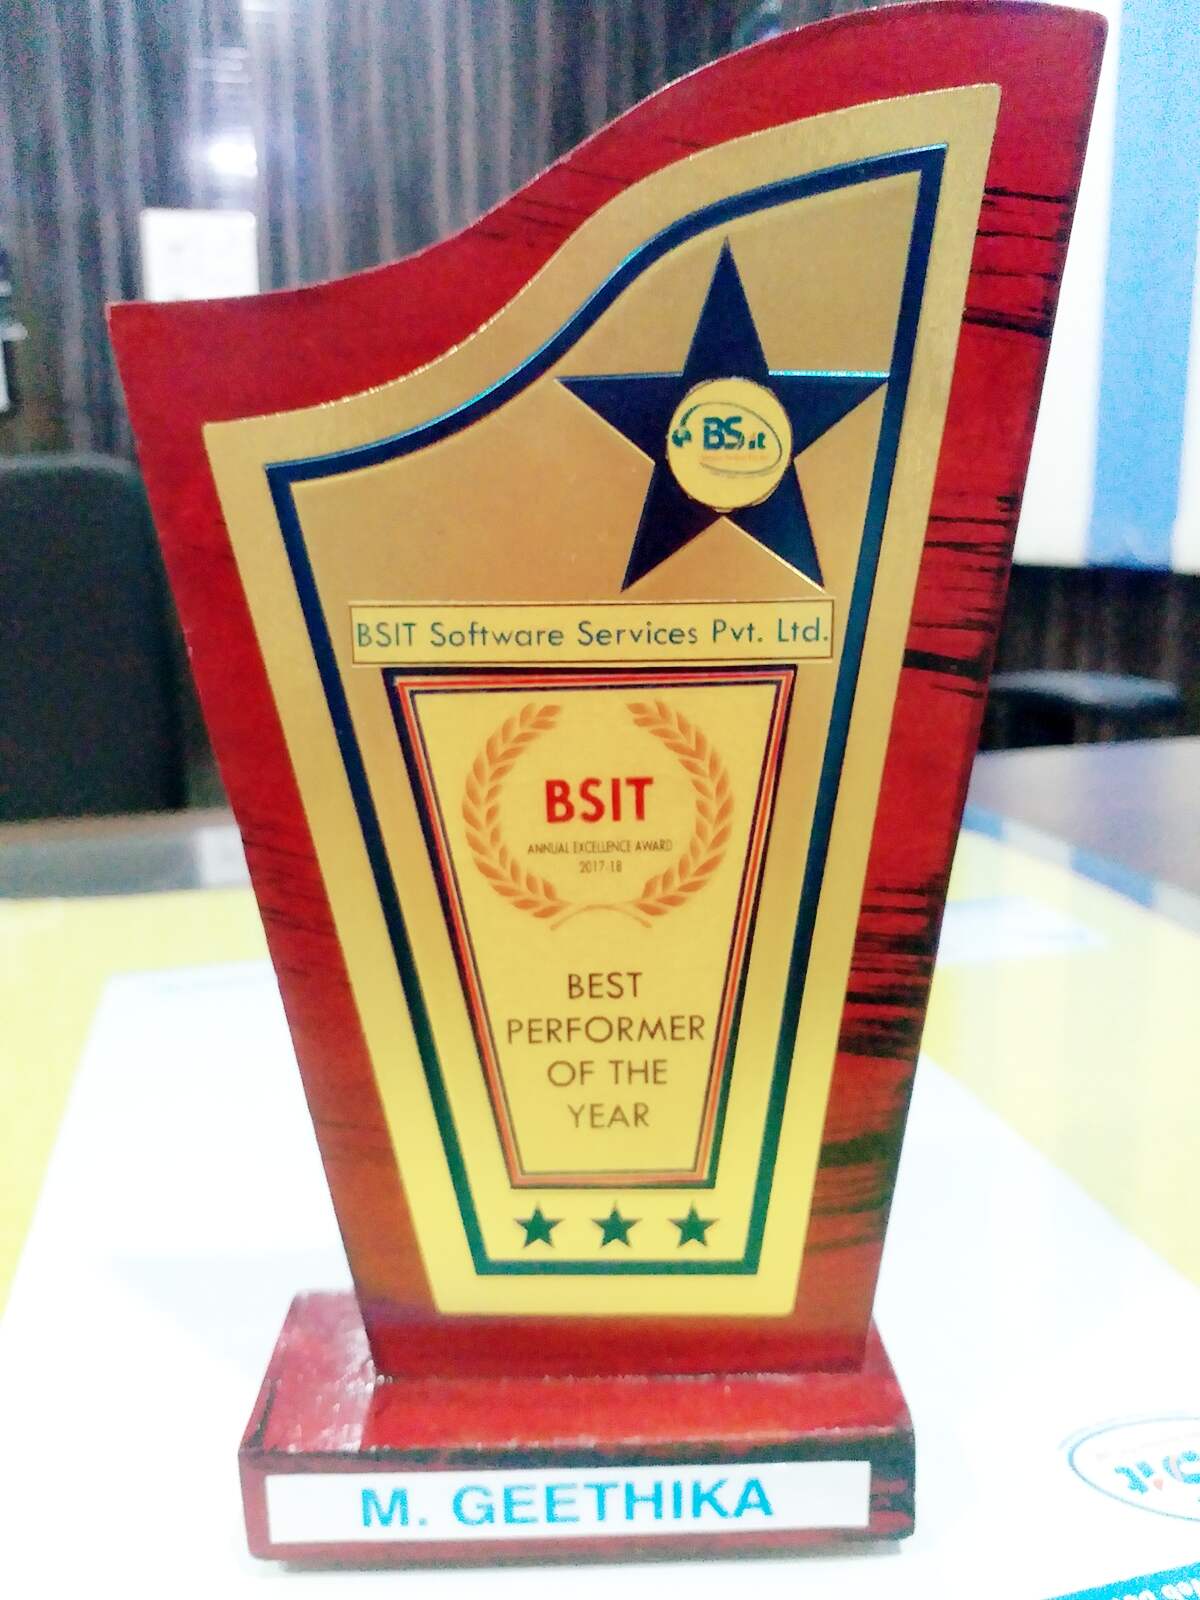 Employee_Award_BSIT_Software_Services_Web_And_App_Development_Company_India